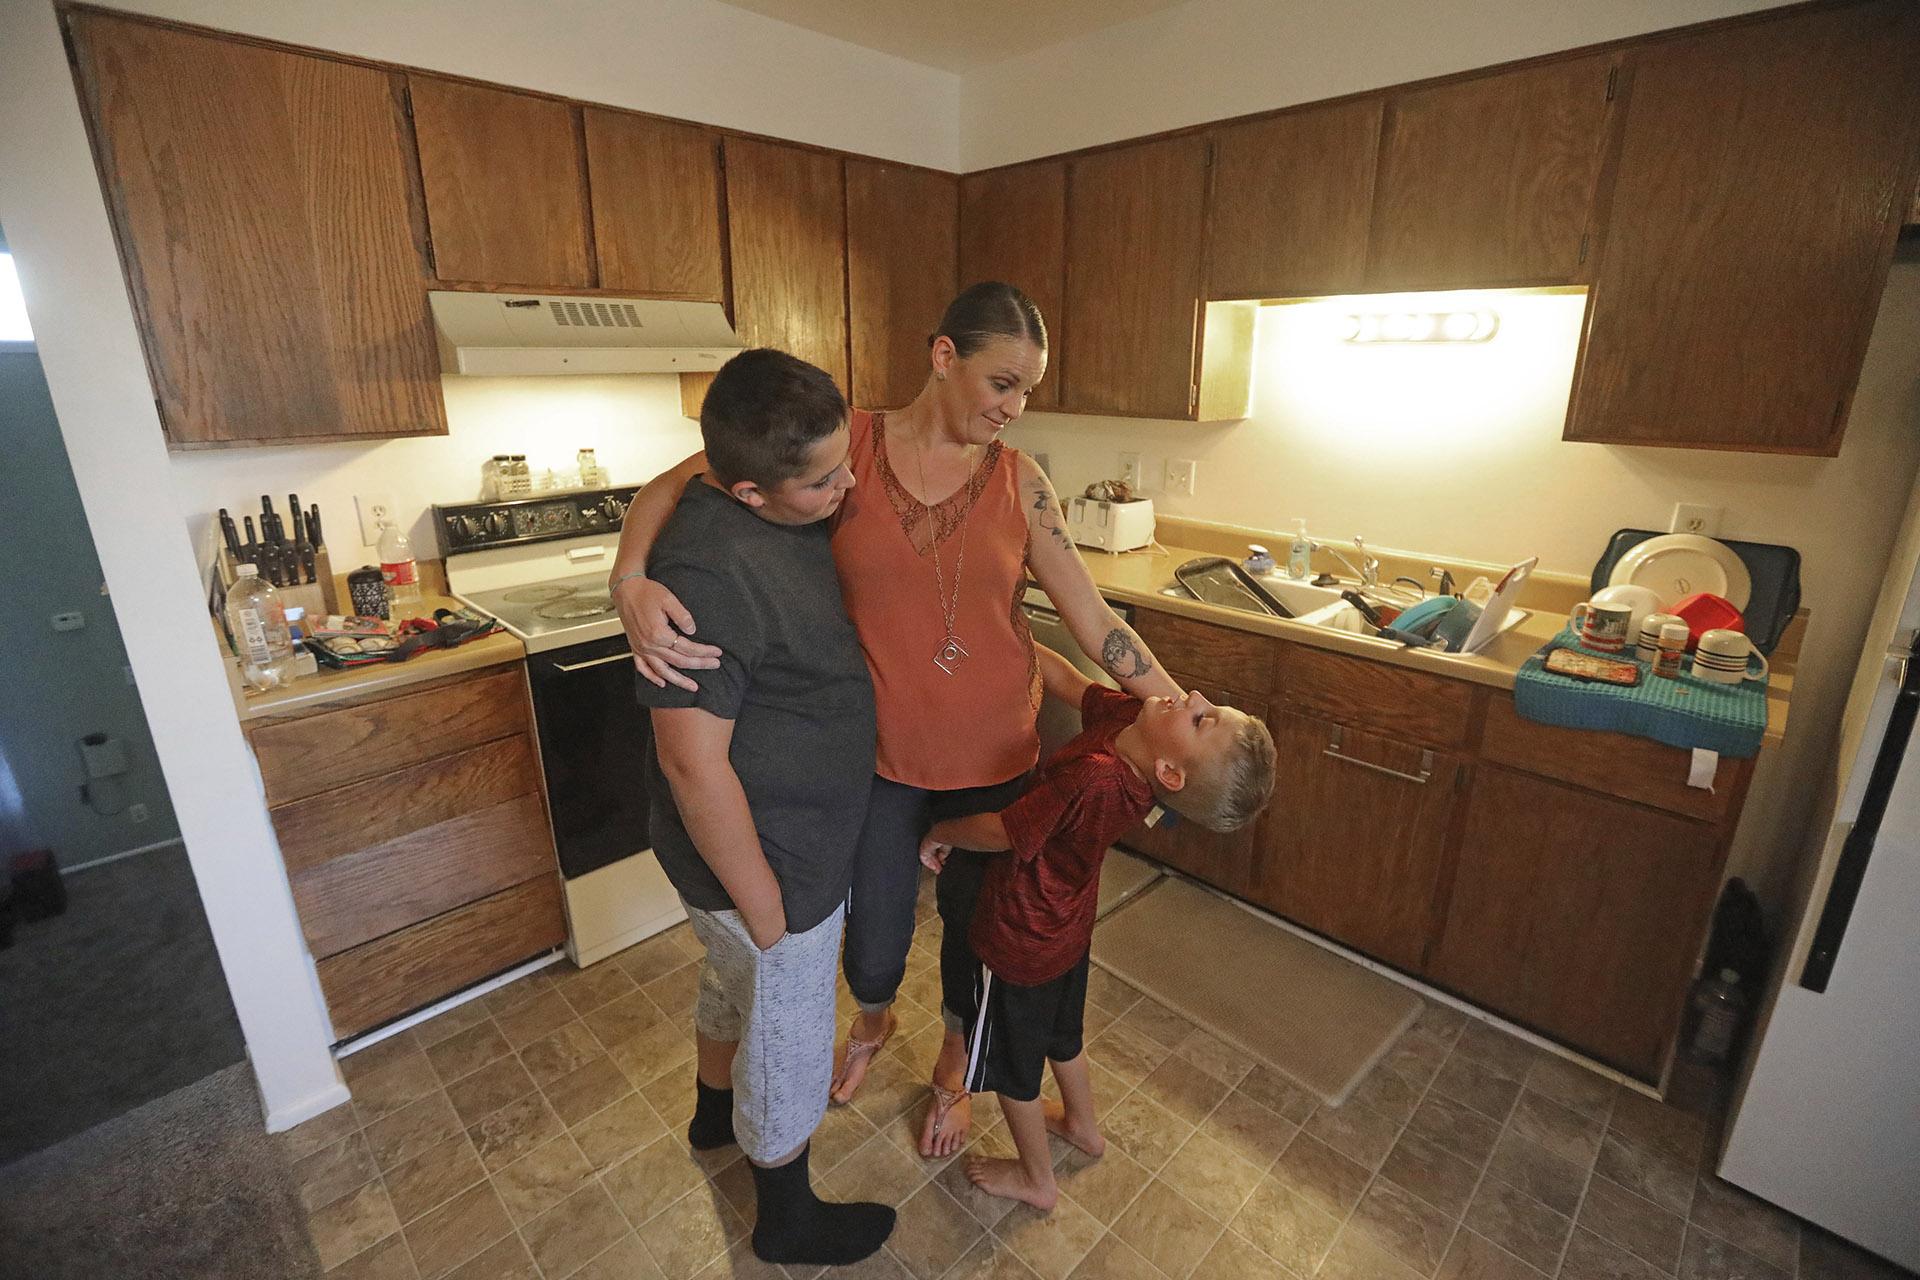 Misty Dotson hugs her son's at their home Tuesday, Aug. 20, 2019, in Murray, Utah. Dotson is a 33-year-old single mother of two boys, ages 12 and 6, who goes to Planned Parenthood for care through the Title X program. (AP Photo / Rick Bowmer)